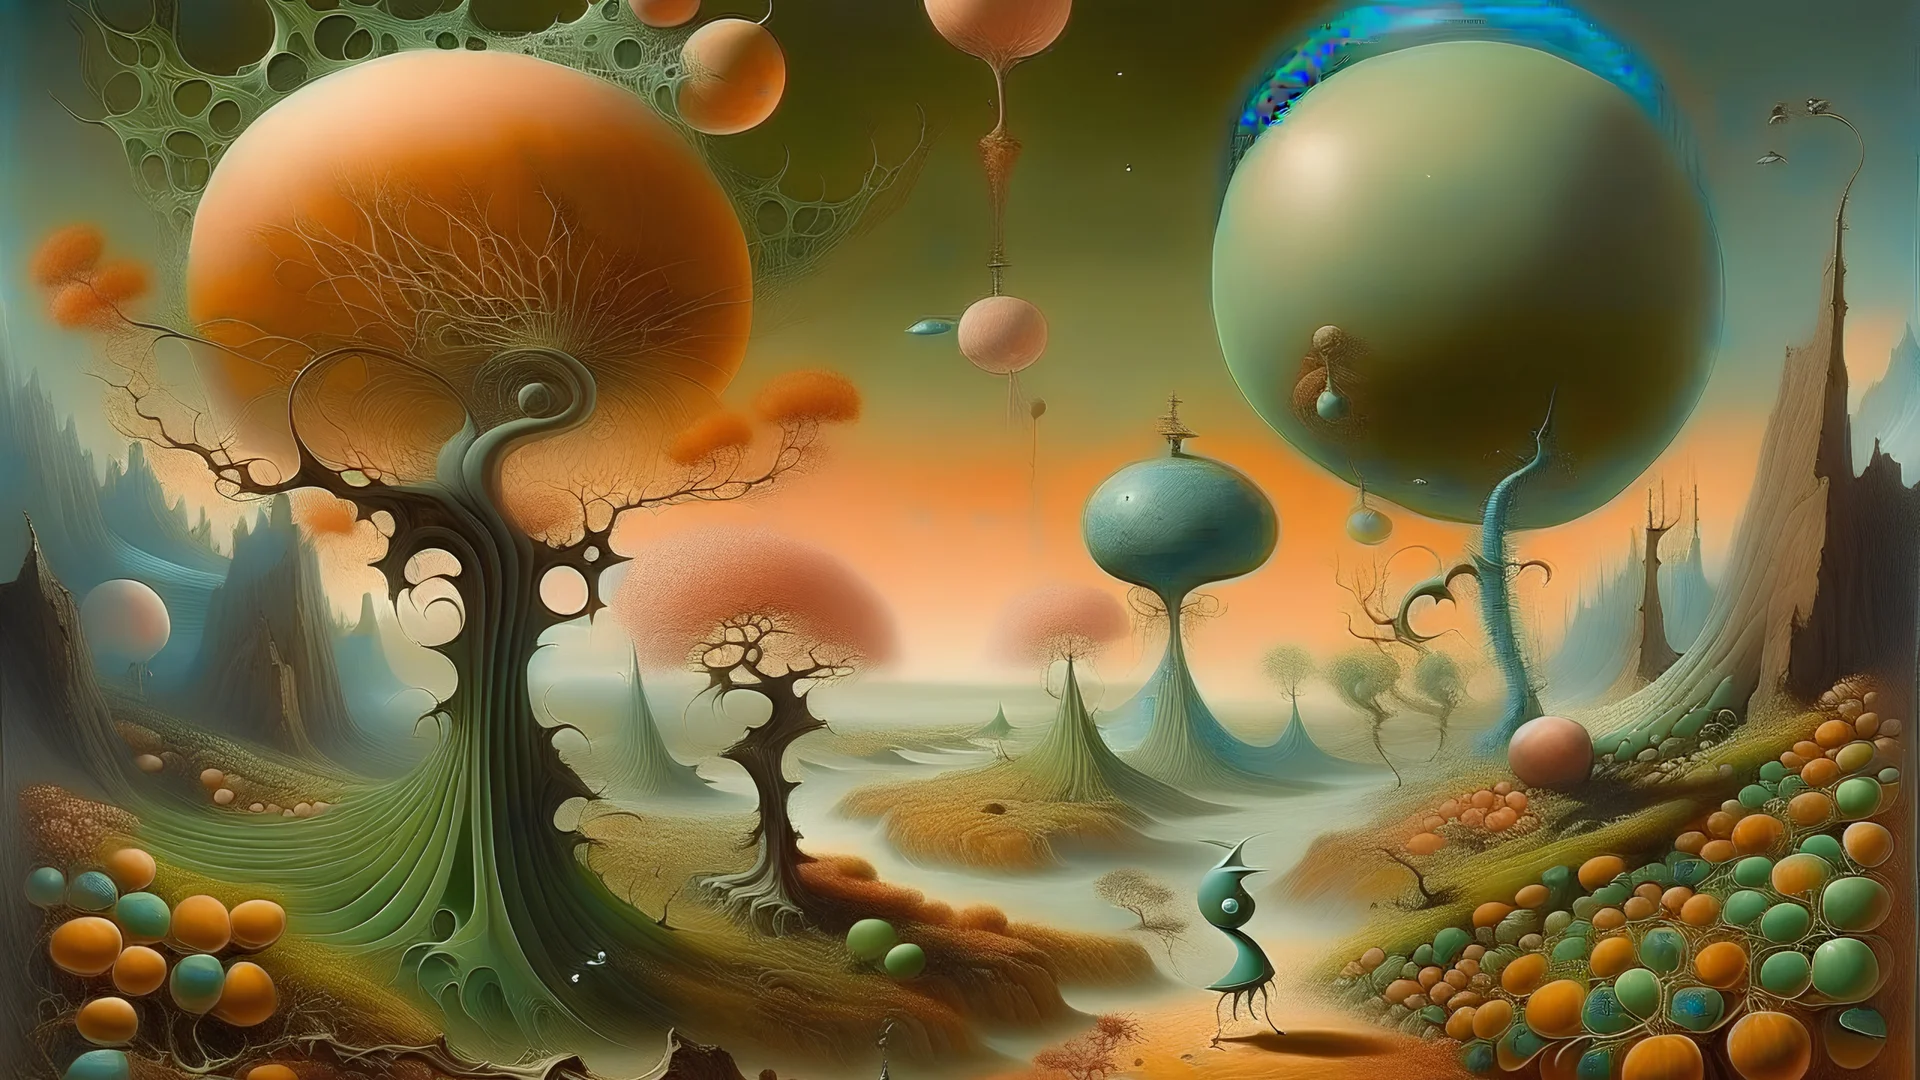 in a surrealist style, the changing of seasons in an alien planet similar to earth with the "words le stagioni"